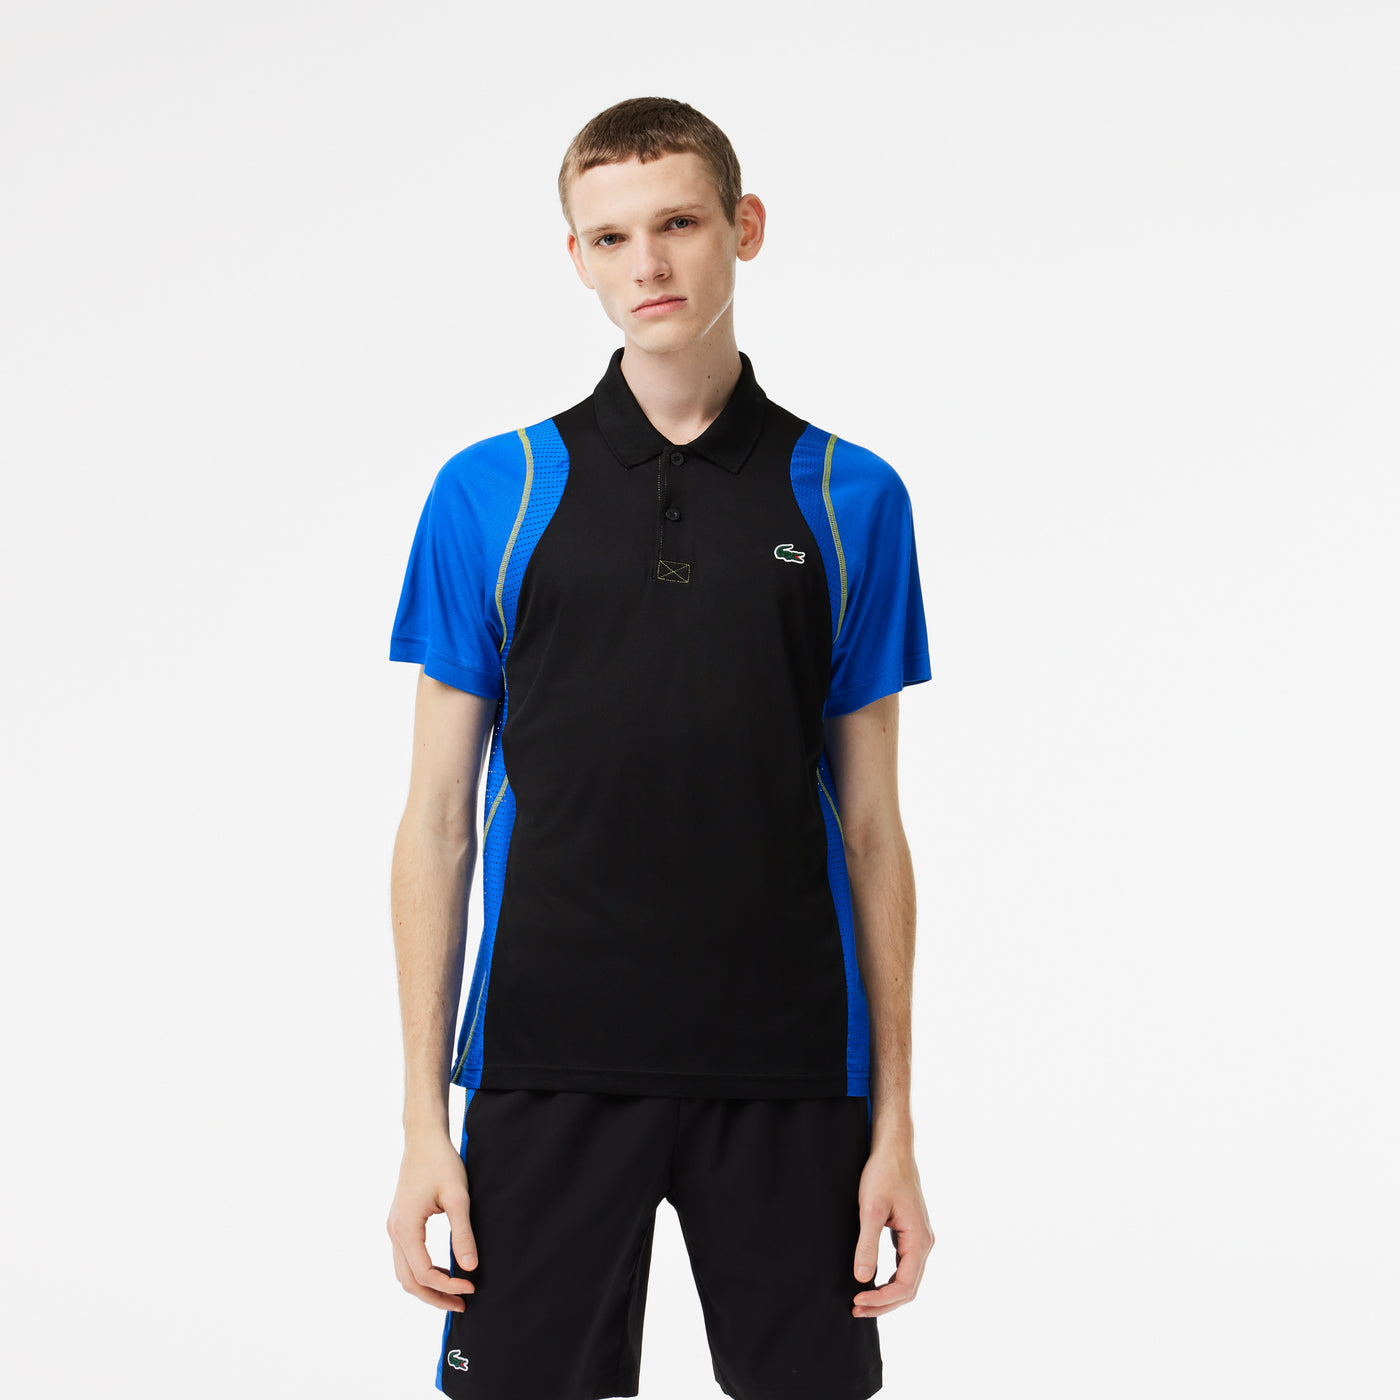 Men’S Lacoste Tennis Recycled Polyester Polo Shirt - Dh5180